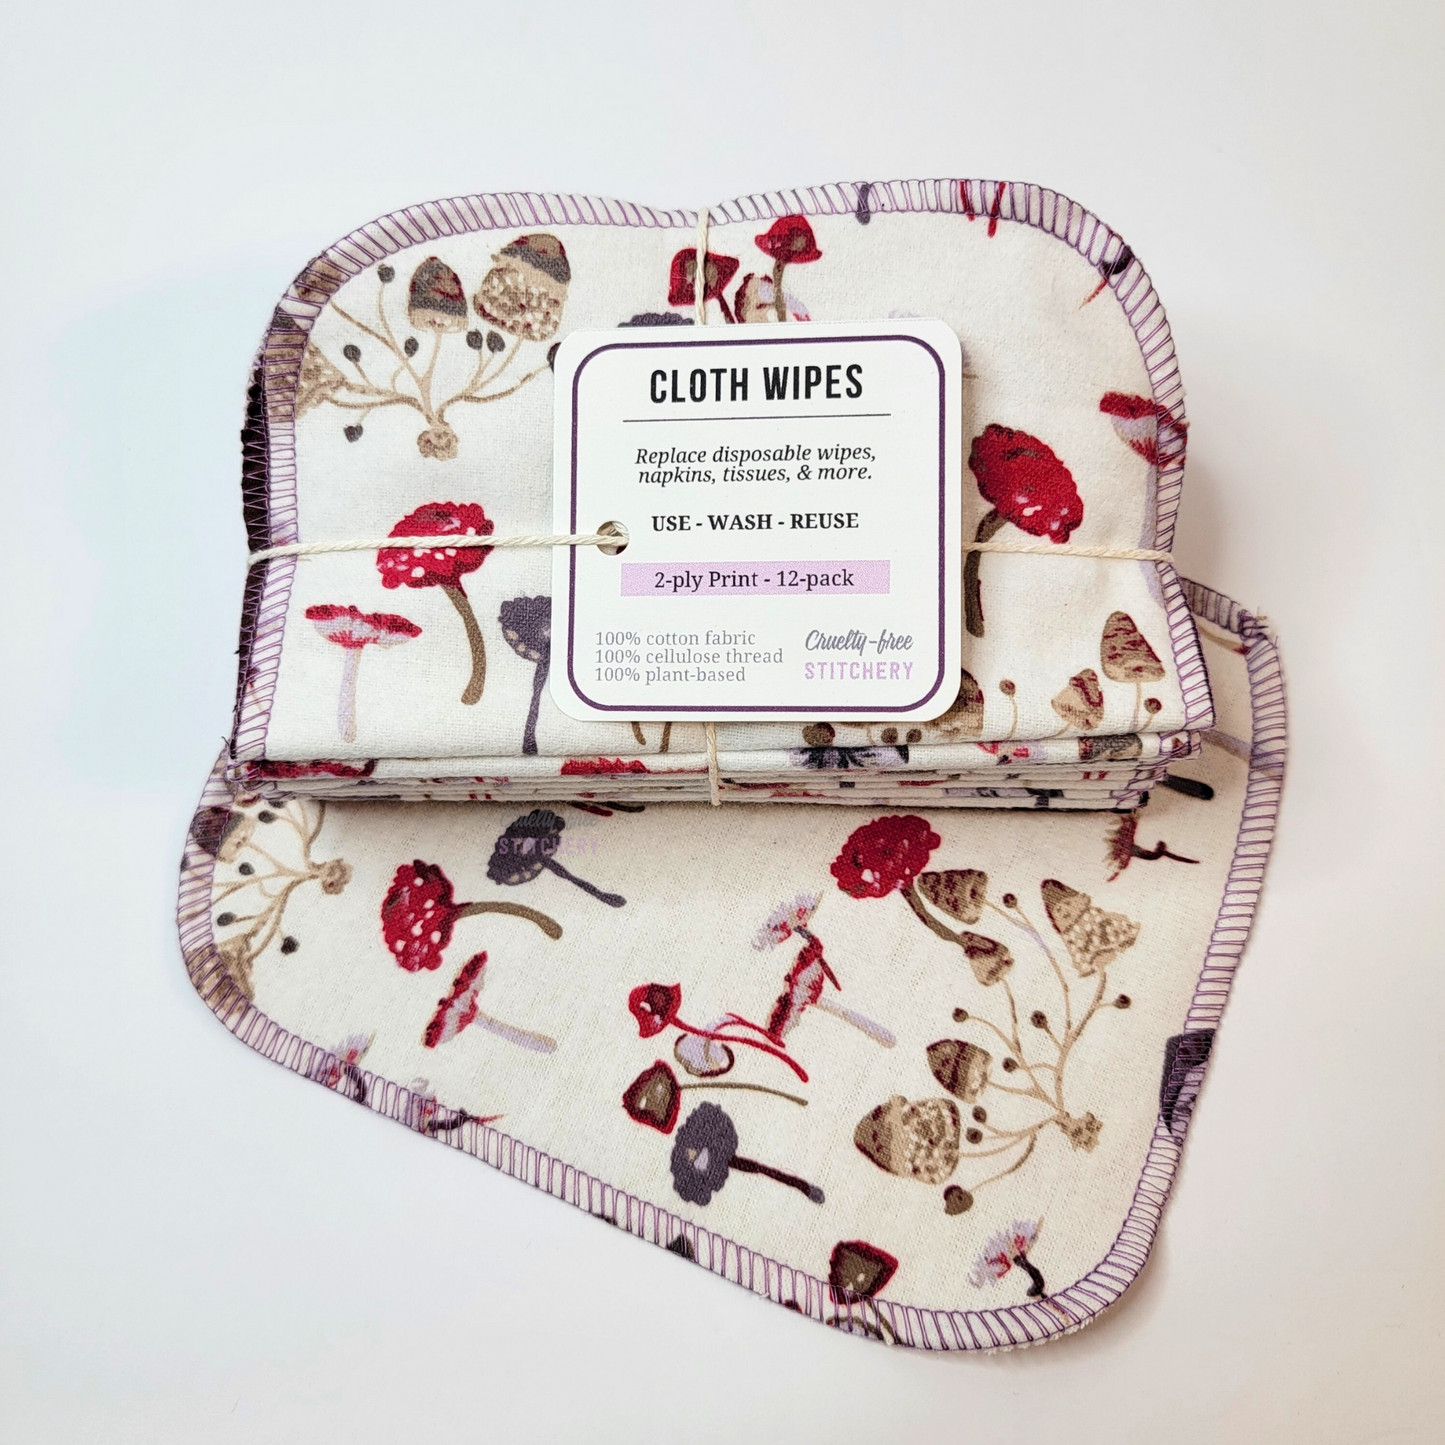 A bundled pack of the cloth wipes, tied with cotton string and a small tag, laid on top of a separate cloth wipe.